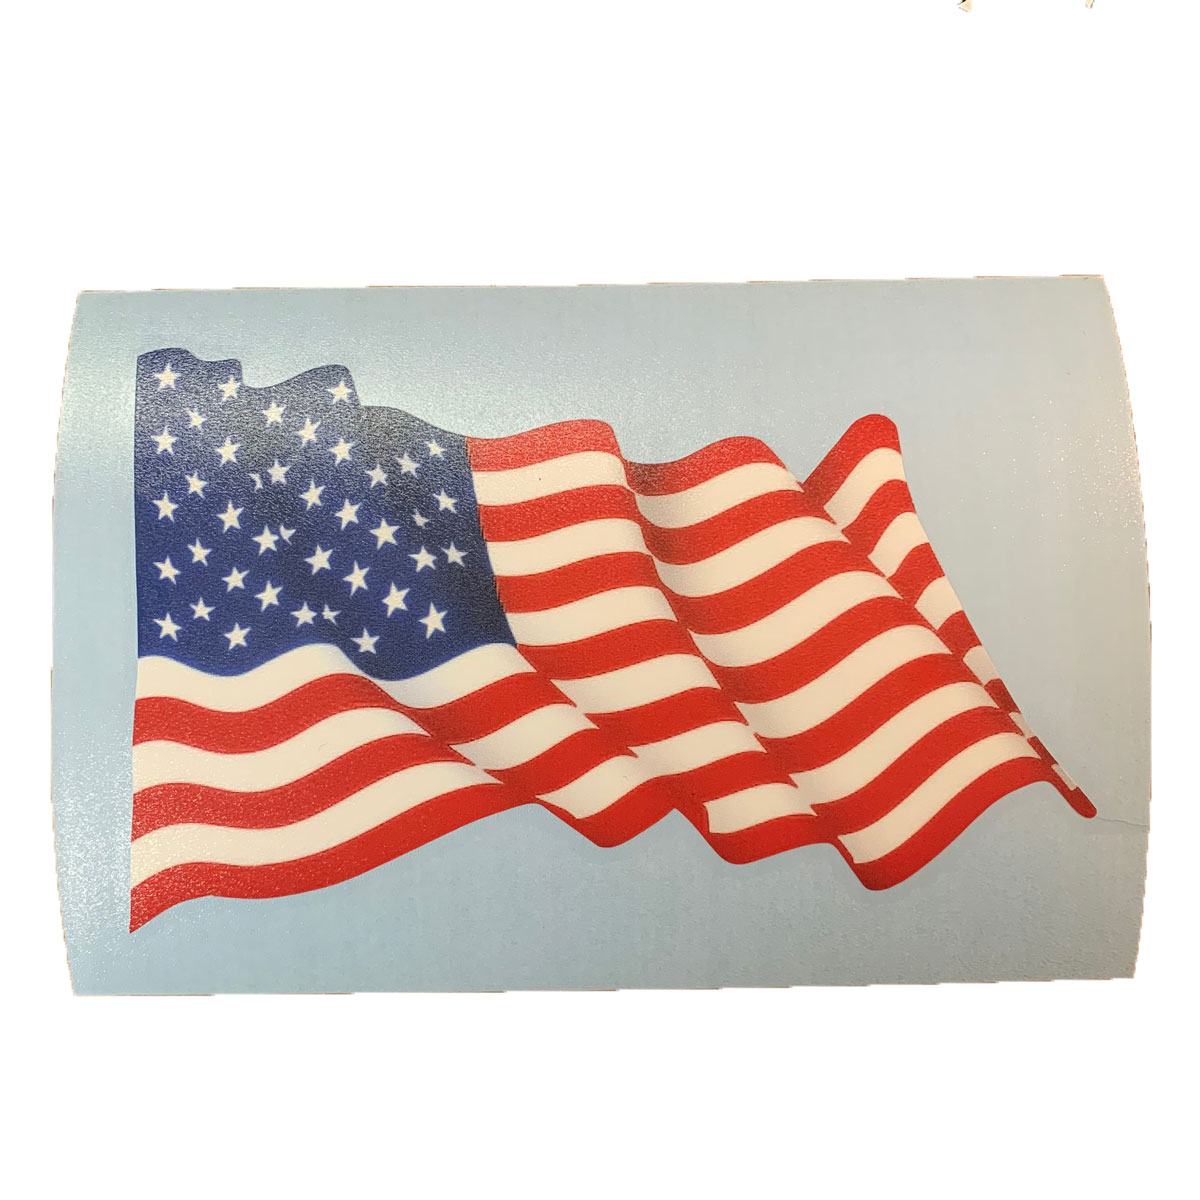 NEW JERSEY Vinyl State Flag DECAL Sticker MADE IN THE USA F345 